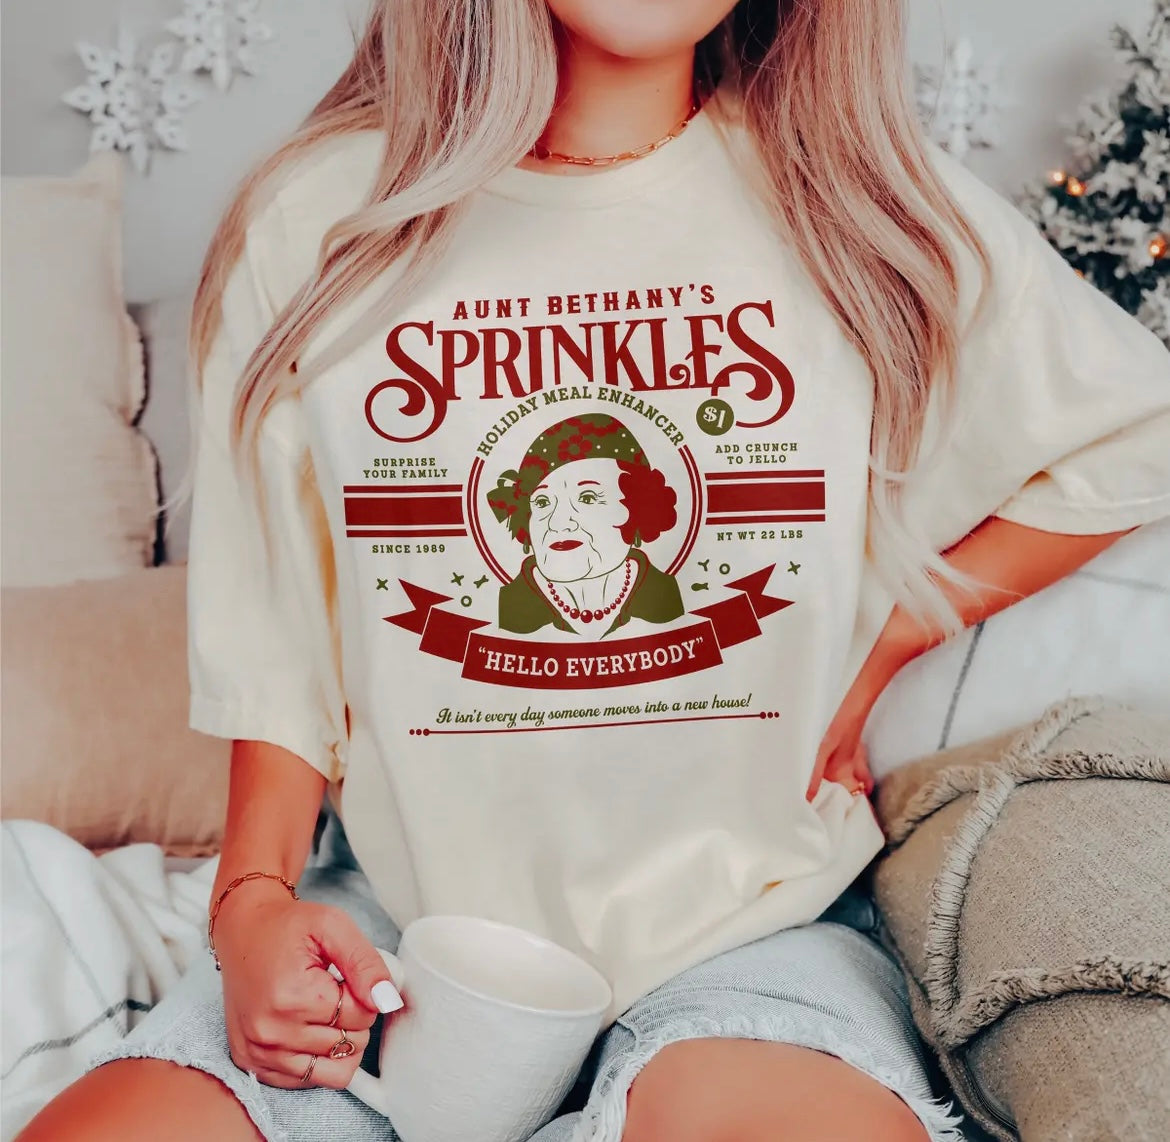 Aunt Bethany’s Sprinkles T